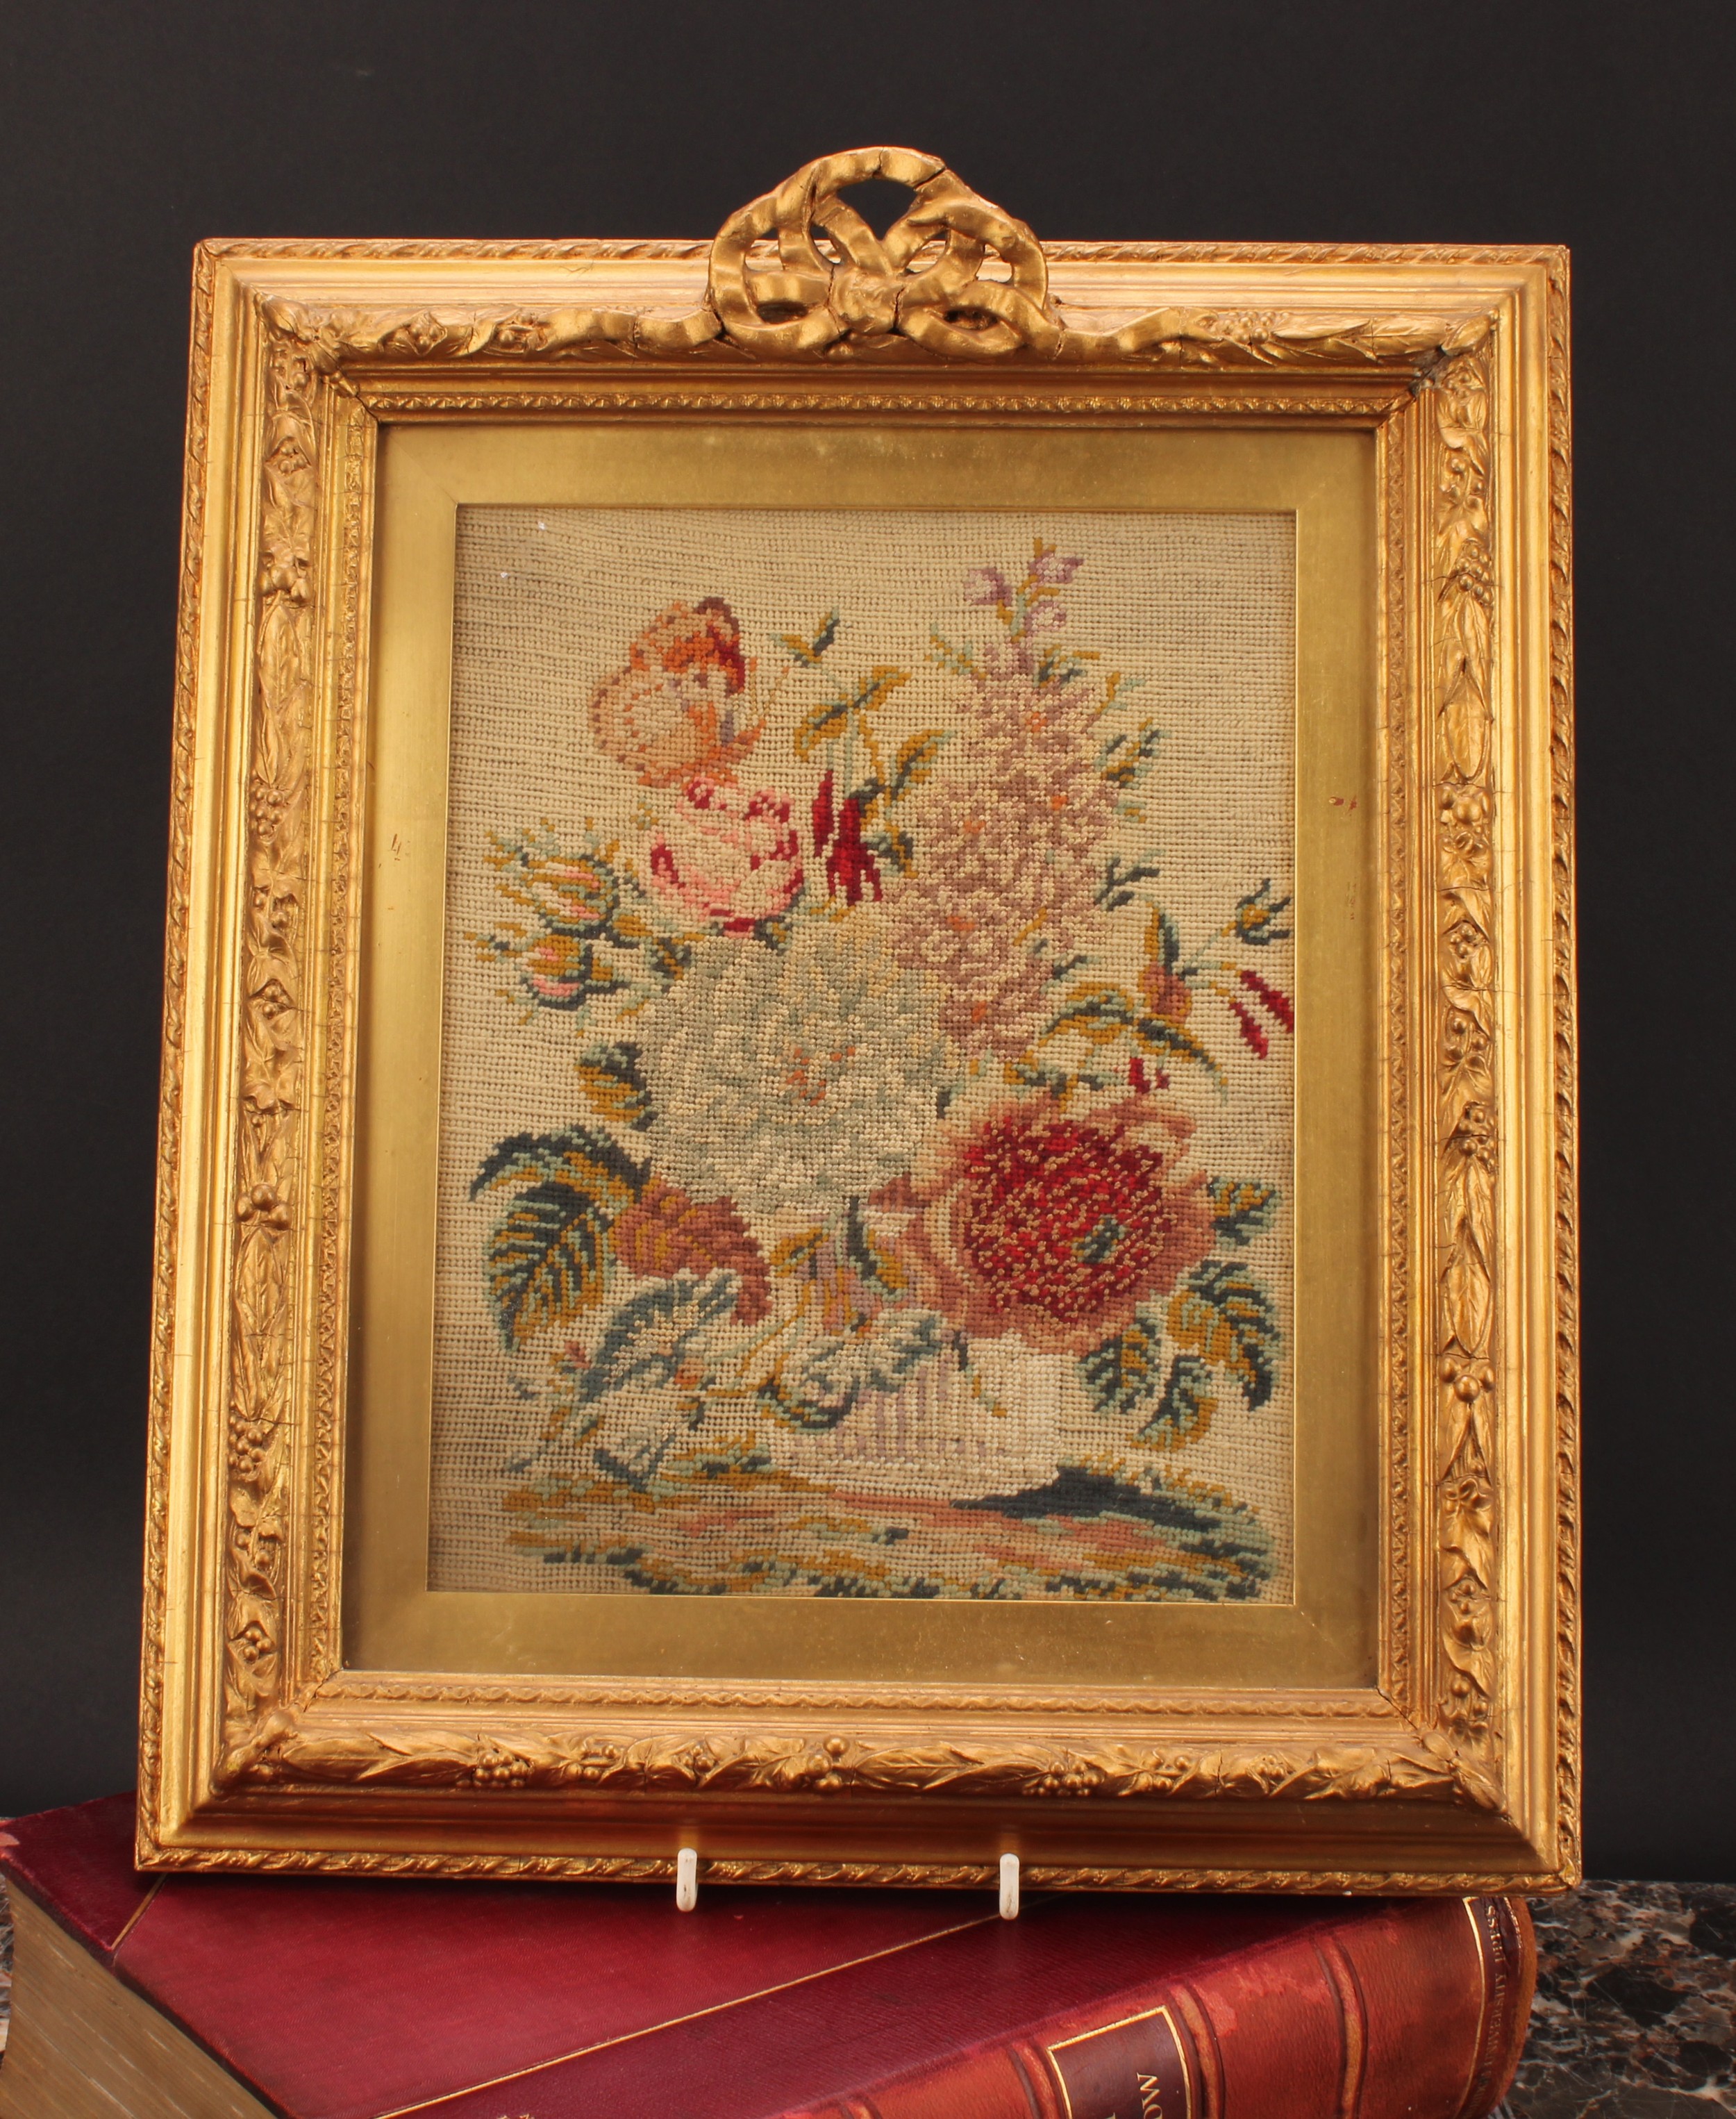 A 19th century woolwork panel, worked in colourful wools with study of flowers, rectangular giltwood